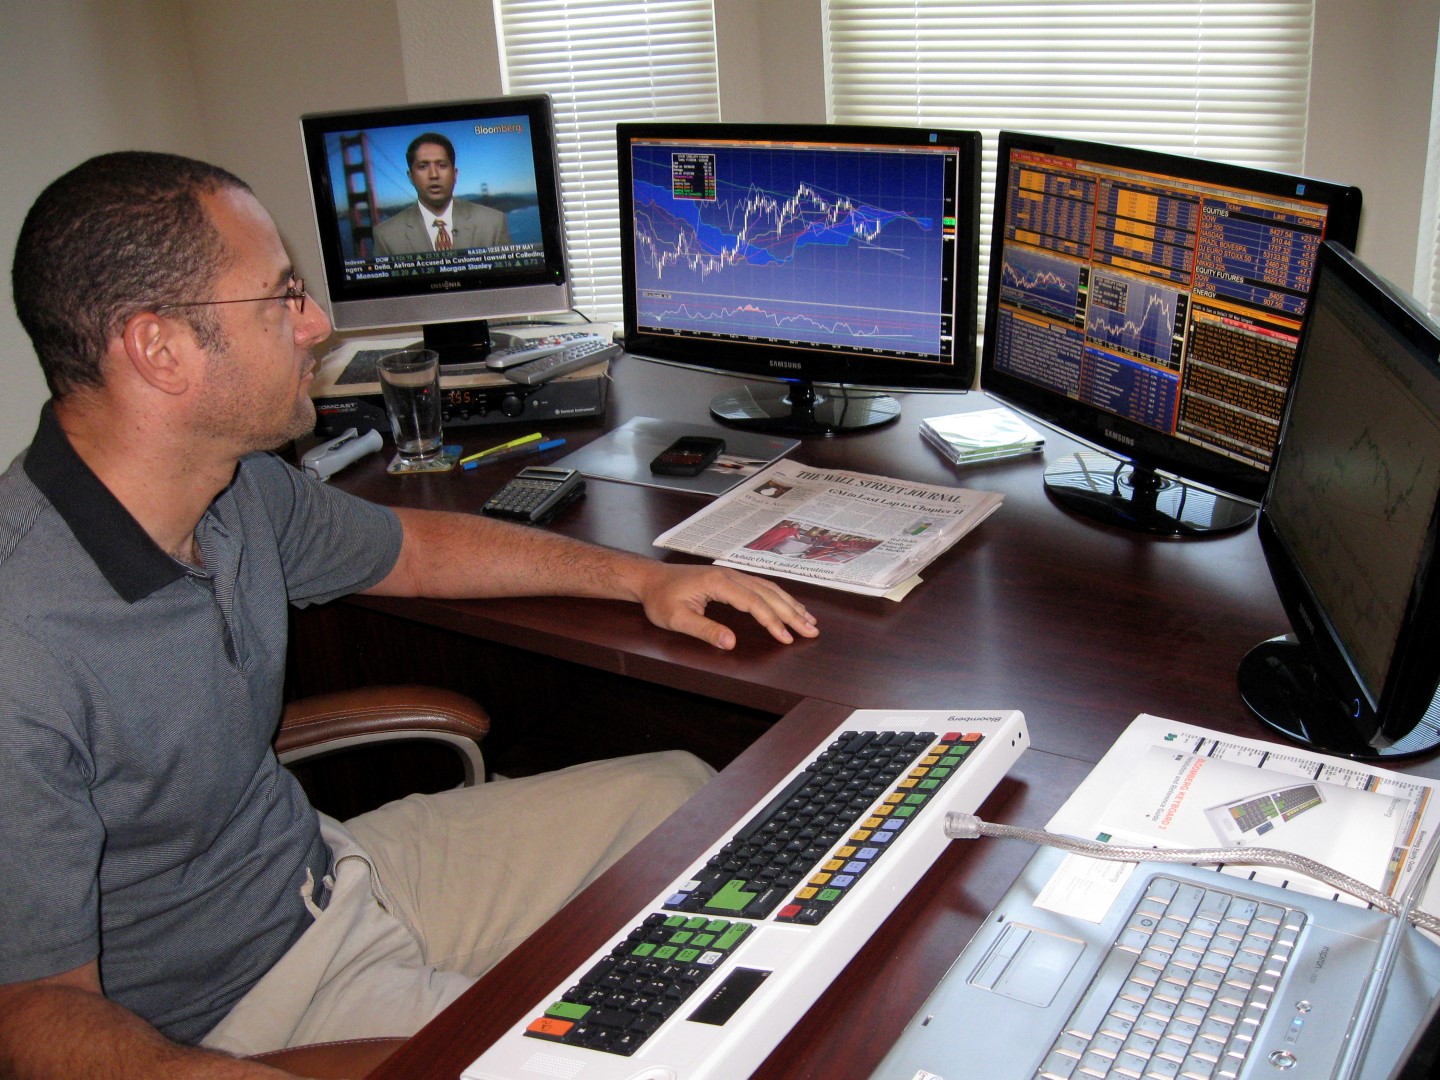 Online trader Raymond Firetag works from his home in Sacramento, California in this undated handout photo. After 14 years in real estate, the 43-year old now makes bets on the world's biggest currency pairs, such as the euro/dollar, dollar/Swiss francs, and sterling/yen, on a laptop hooked up to four monitors in his house. To match feature MARKET/CURRENCIES REUTERS/Handout (UNITED STATES BUSINESS) FOR EDITORIAL USE ONLY. NOT FOR SALE FOR MARKETING OR ADVERTISING CAMPAIGNS - RTR247KB